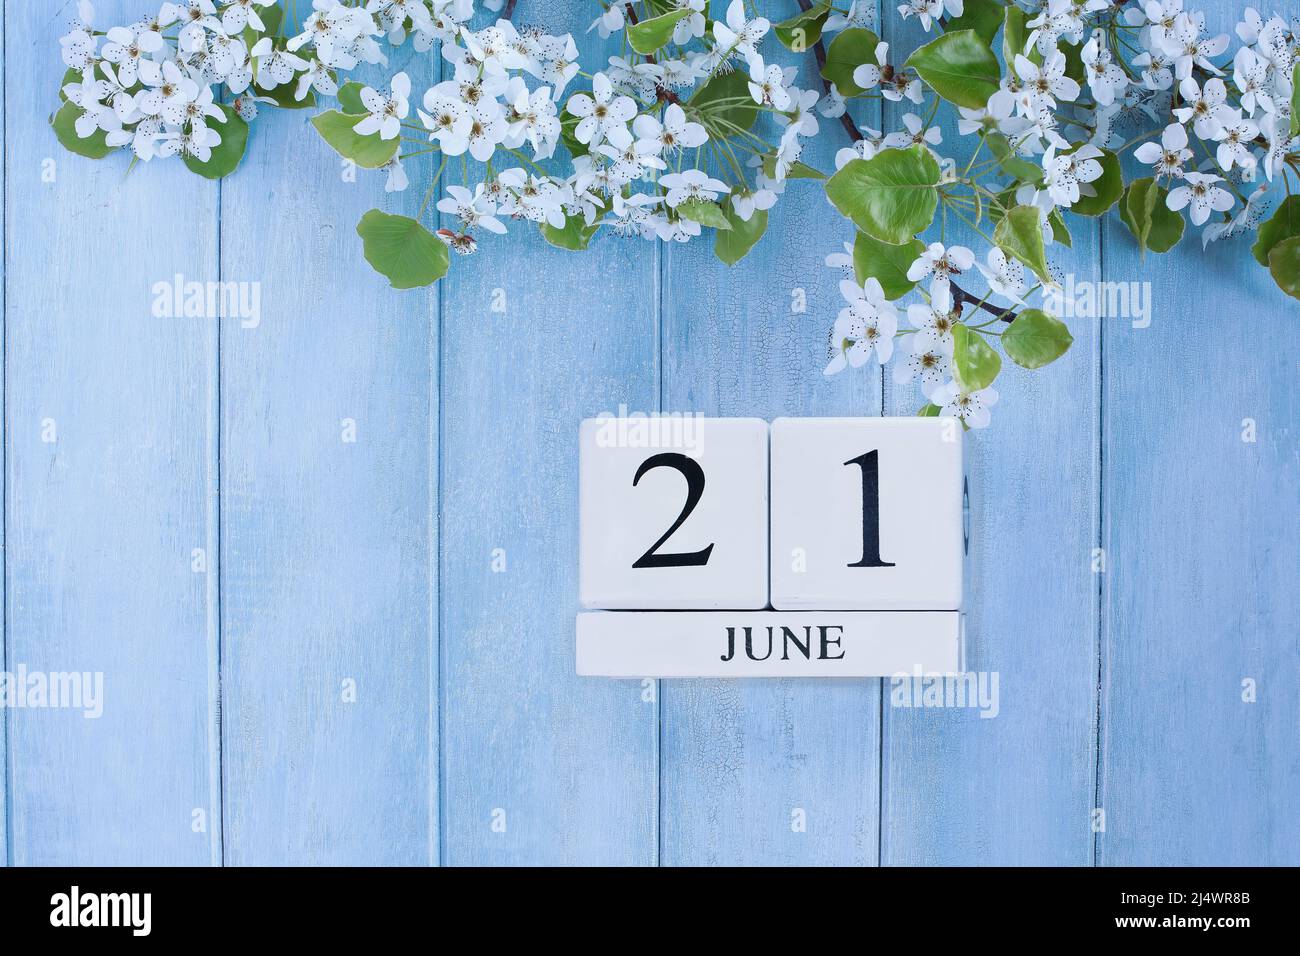 Summer Solstice. Beautiful white tree blossoms against a peaceful blue rustic wooden background. June 21st calendar blocks. Image shot from above. Stock Photo